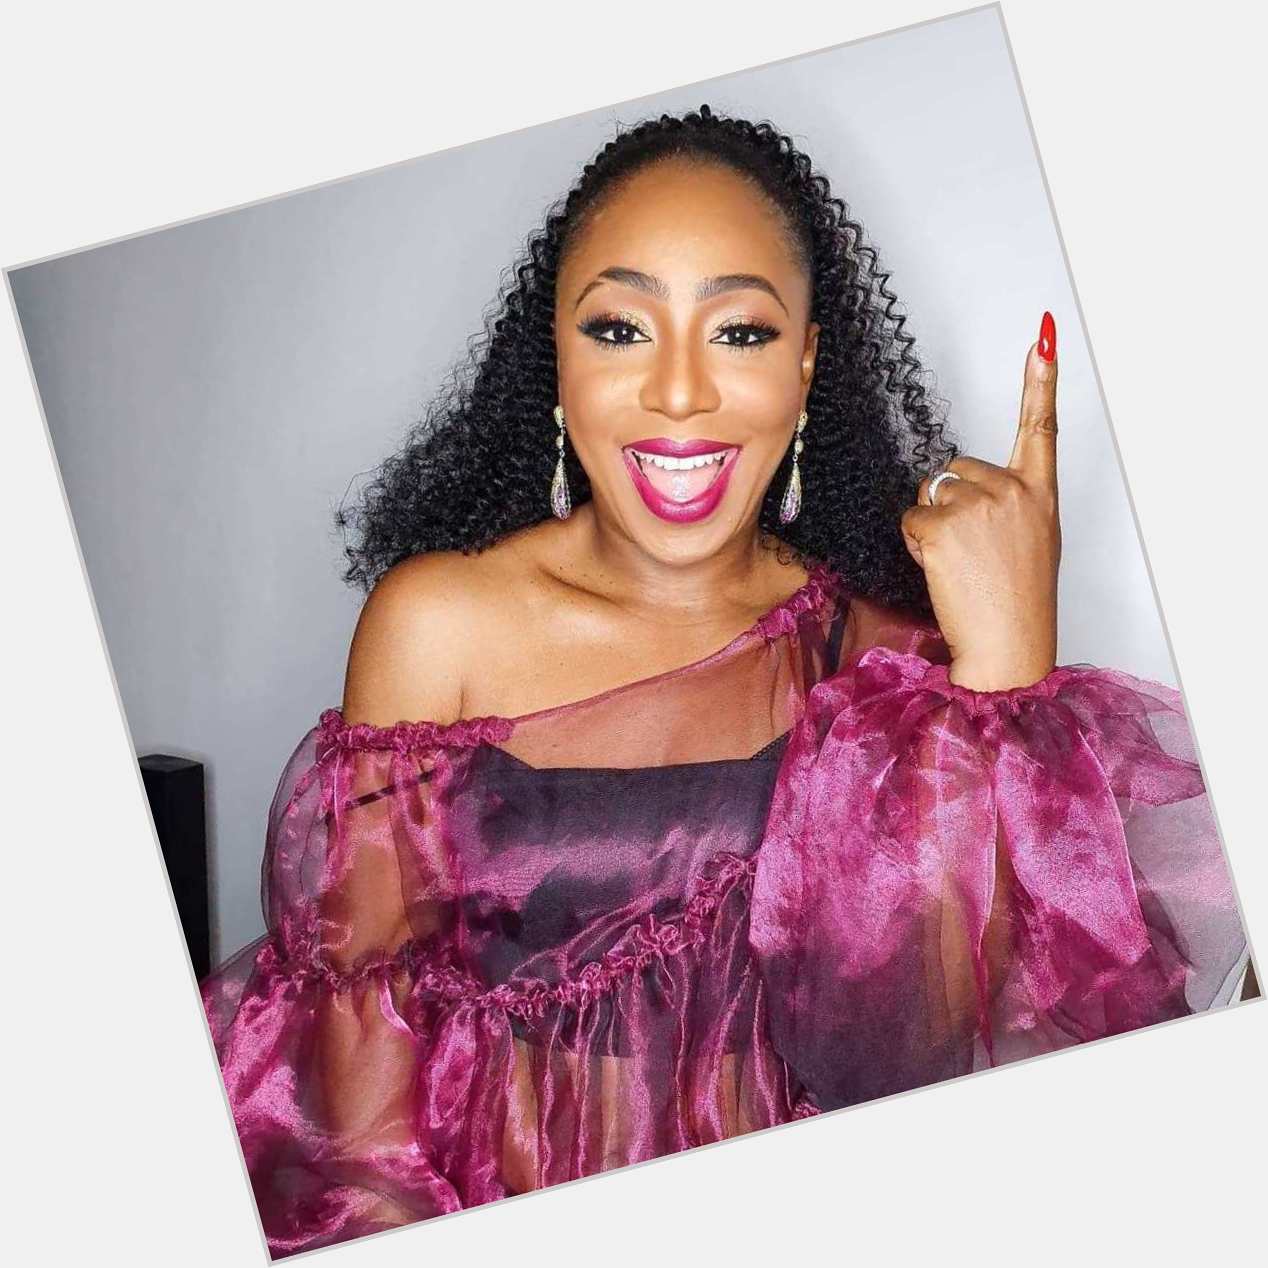 Dakore Egbuson-Akande is a Completely happy Birthday Belle in these Images  